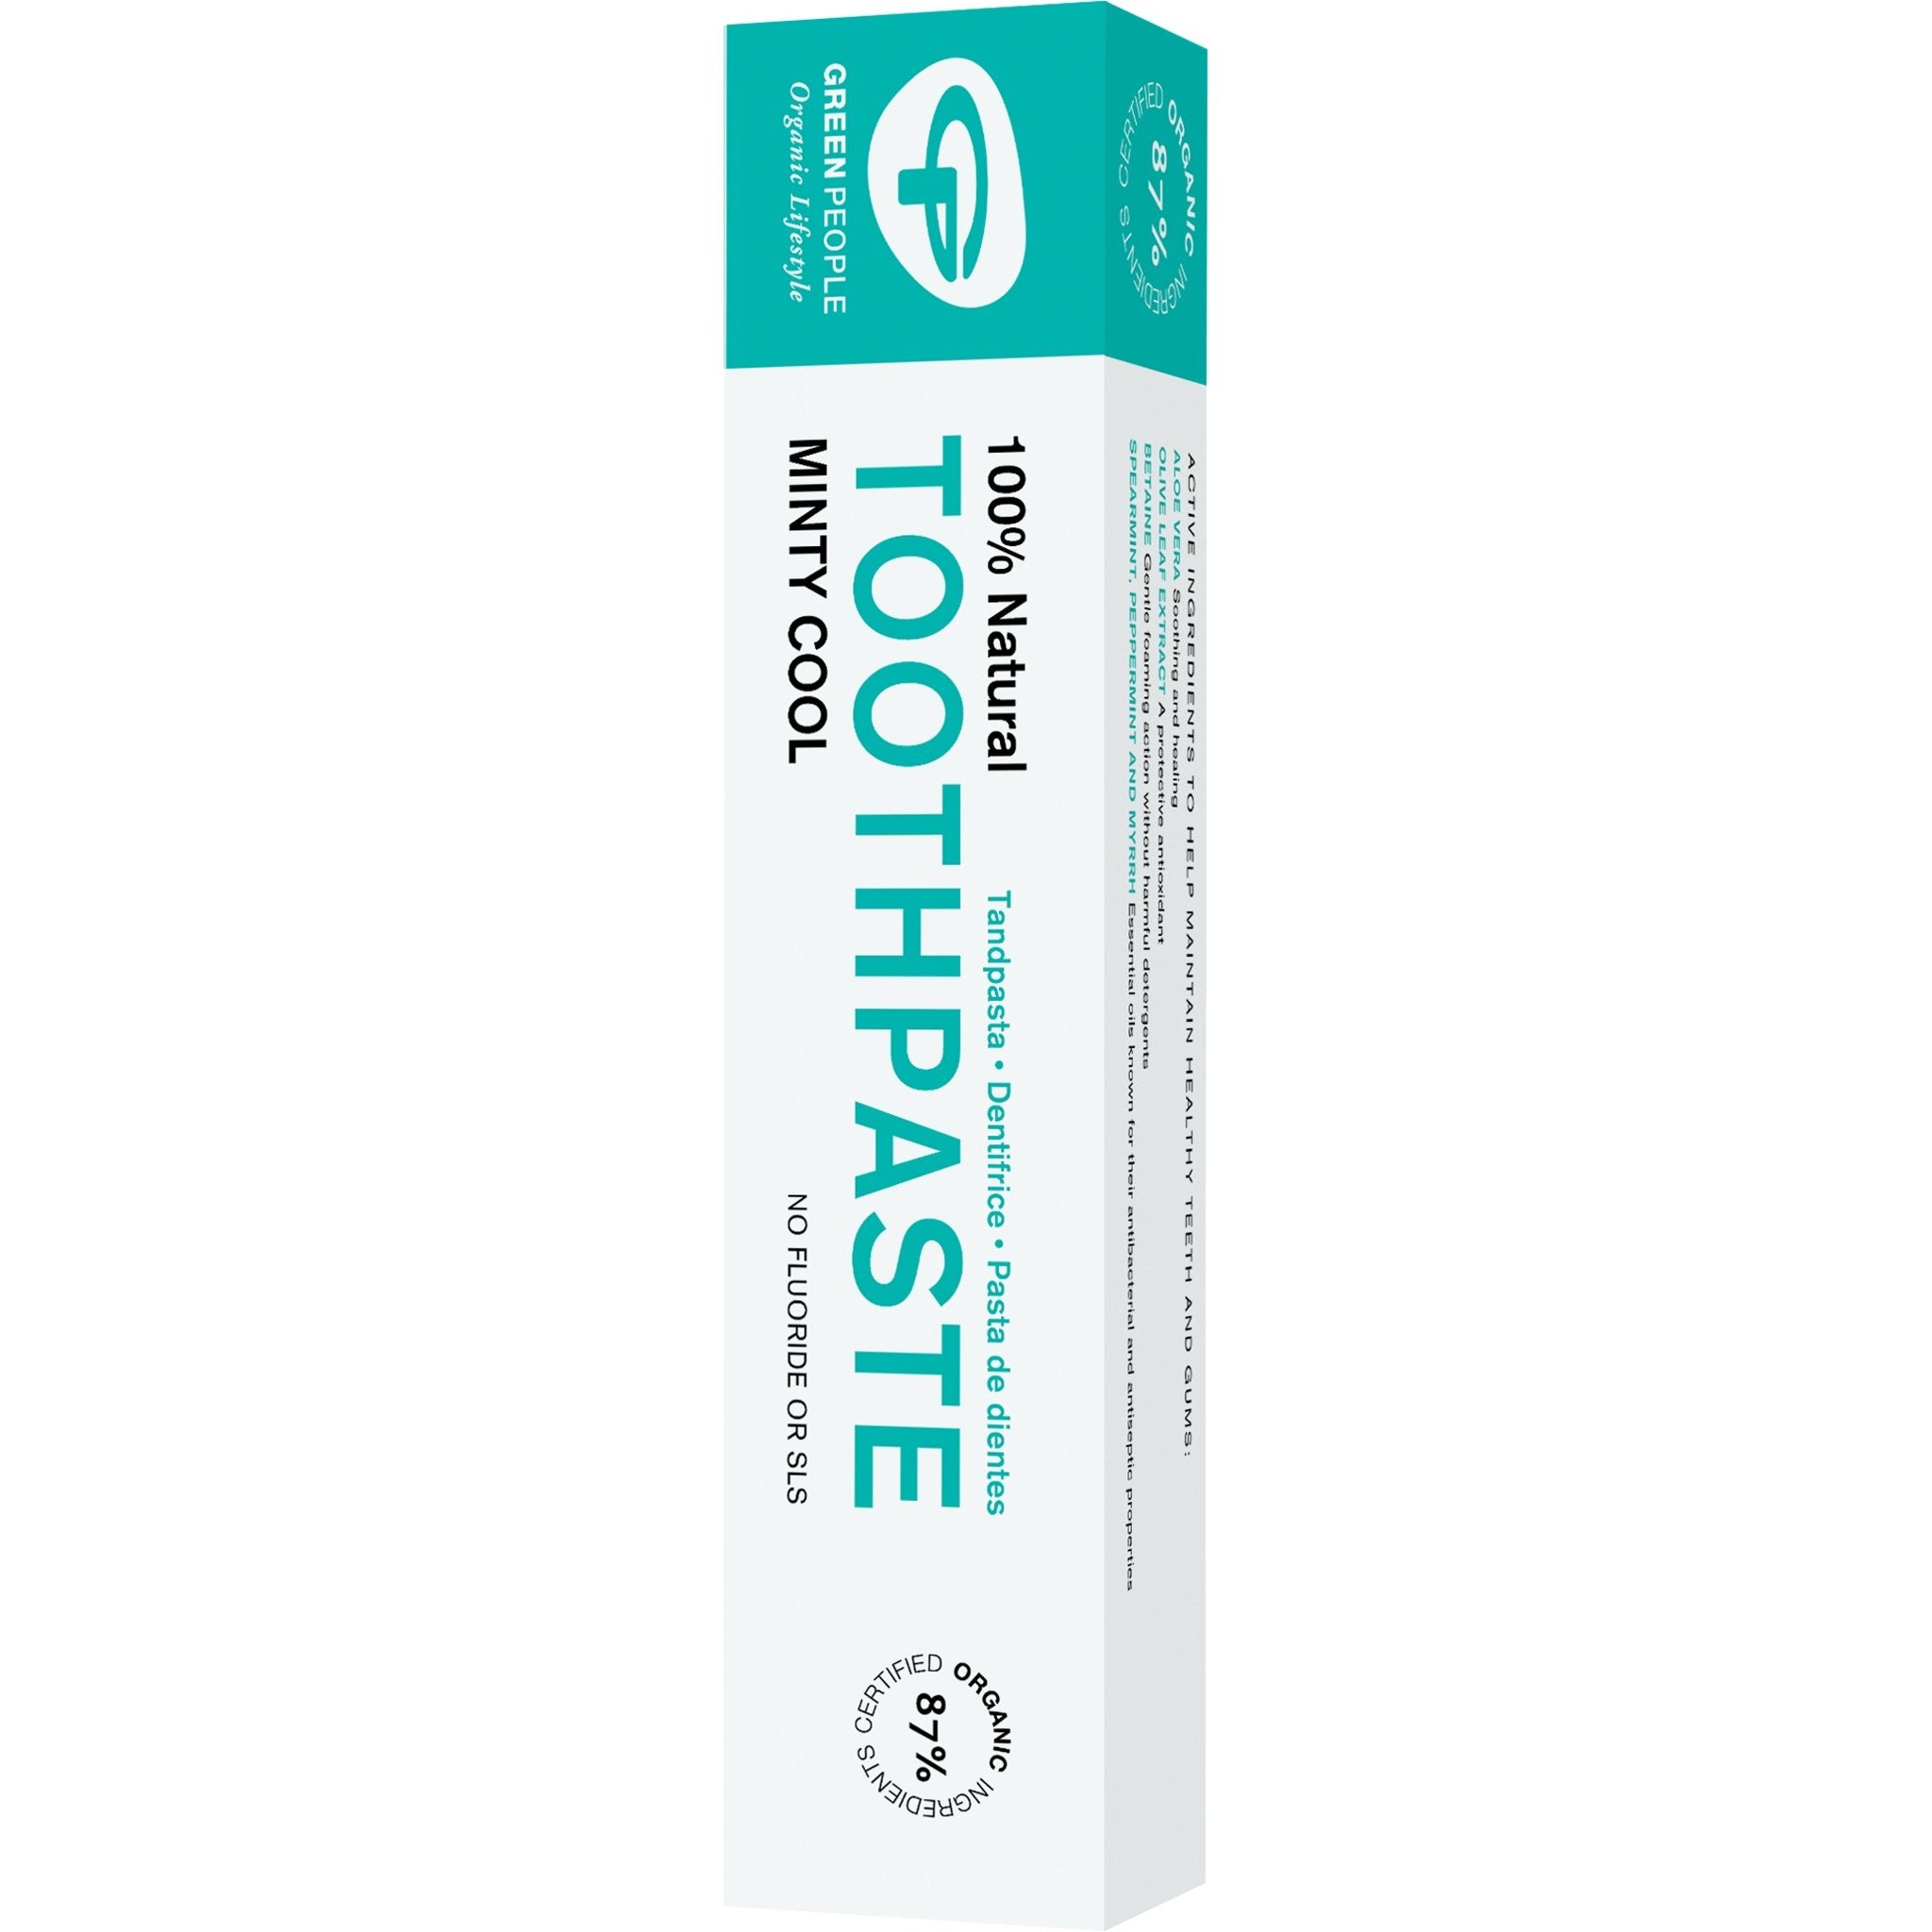 Minty Cool Toothpaste - mypure.co.uk